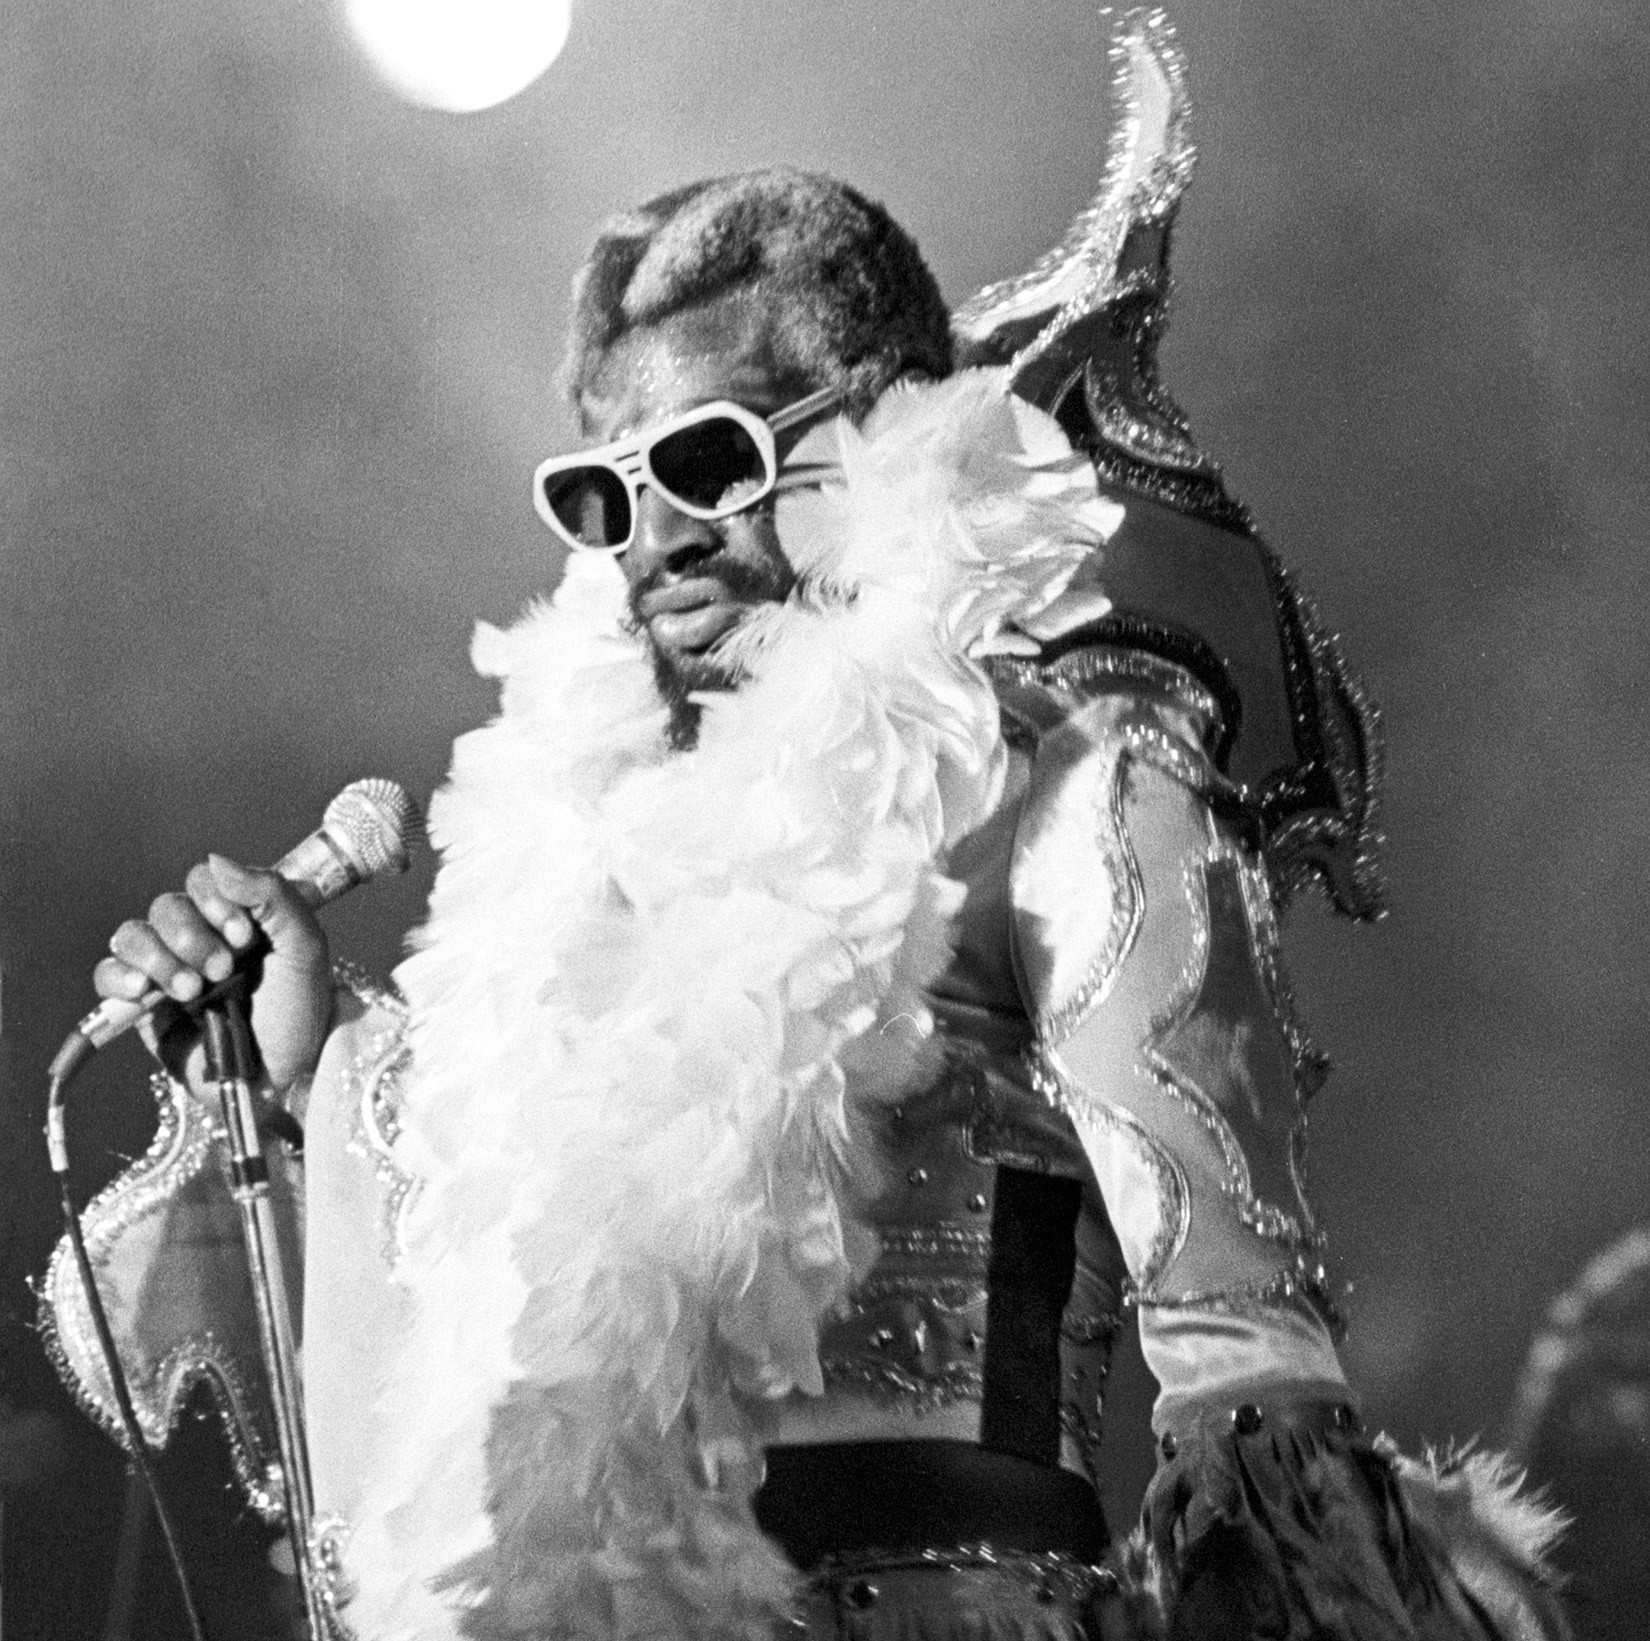 Wishing the father of funk George Clinton a happy 80th birthday.

listen. watch. read.  